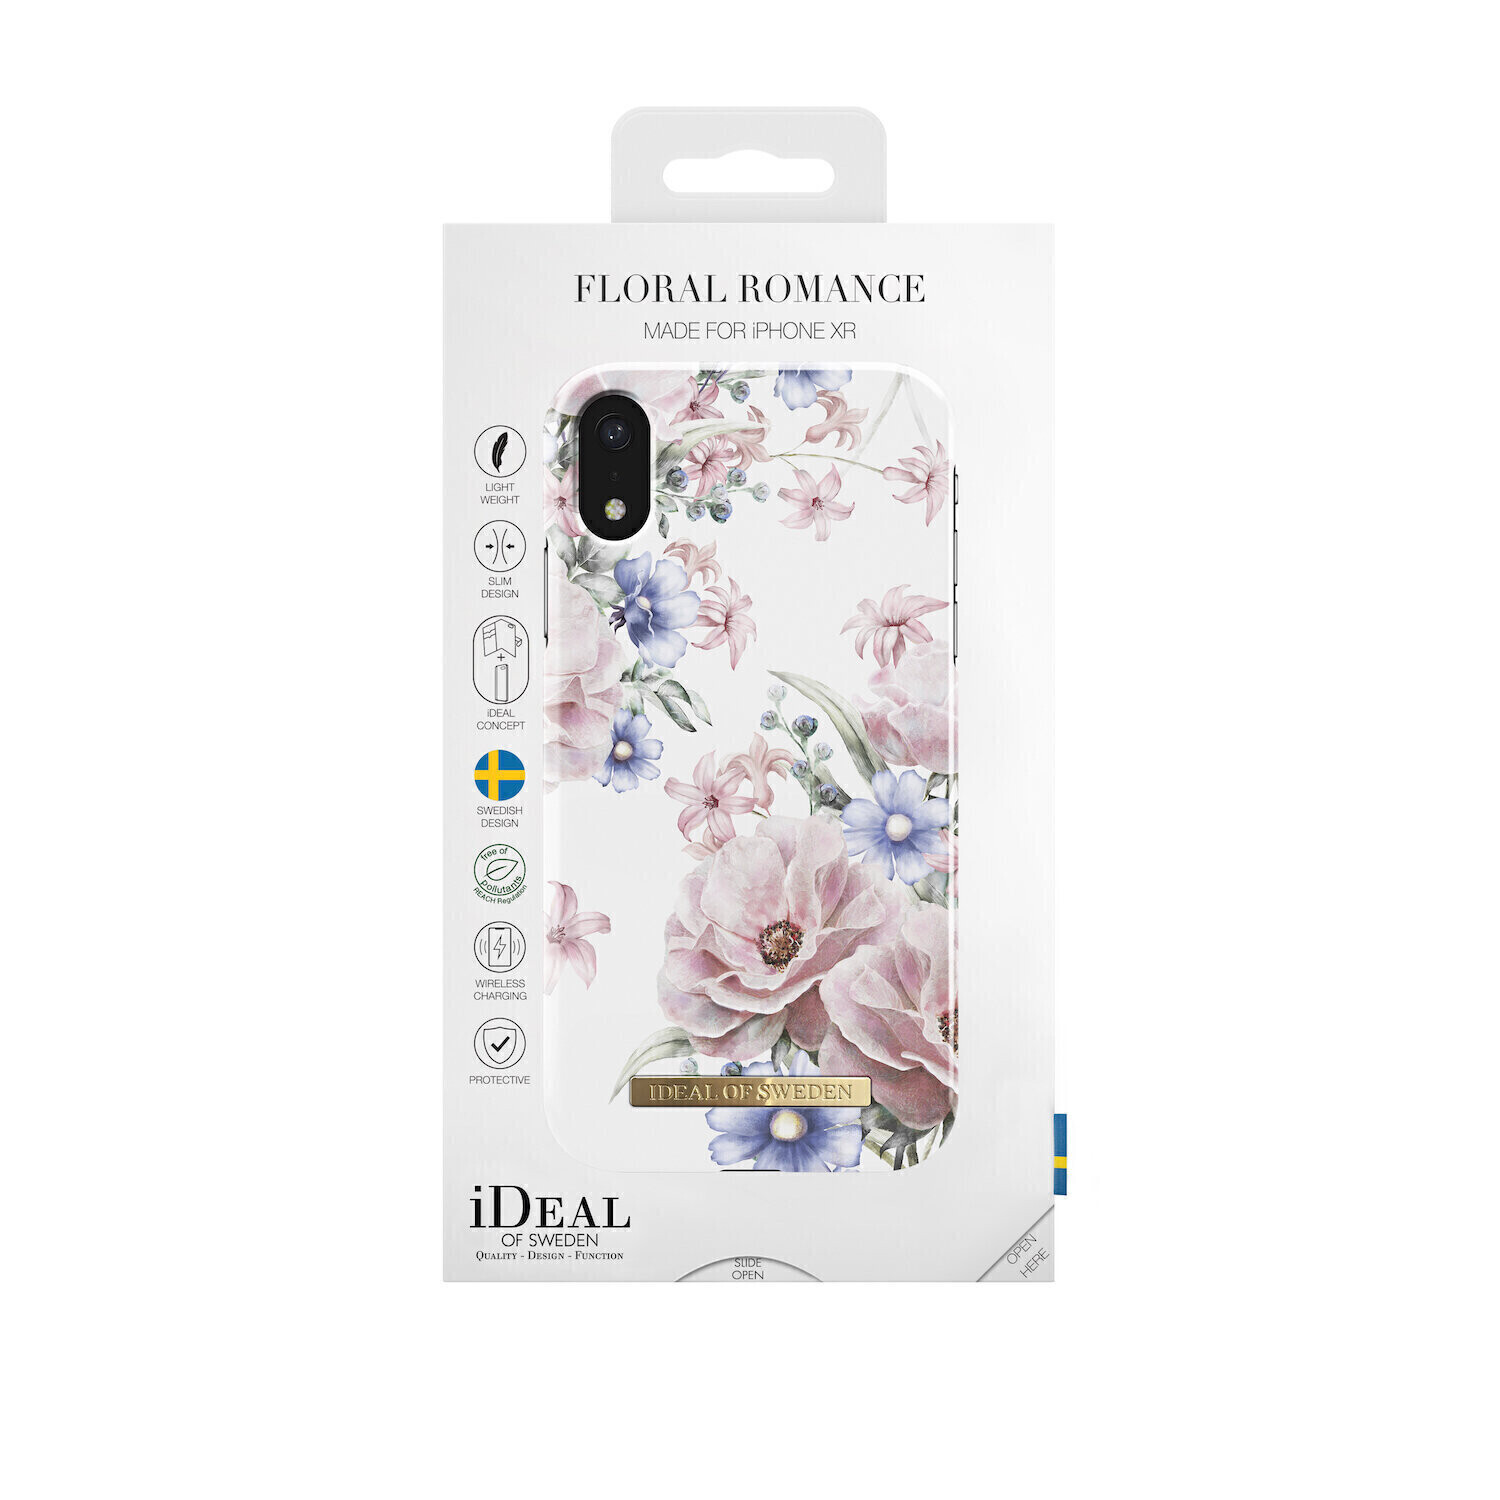 iDeal Of Sweden iPhone XR Fashion Case S/S 2017, Floral Romance